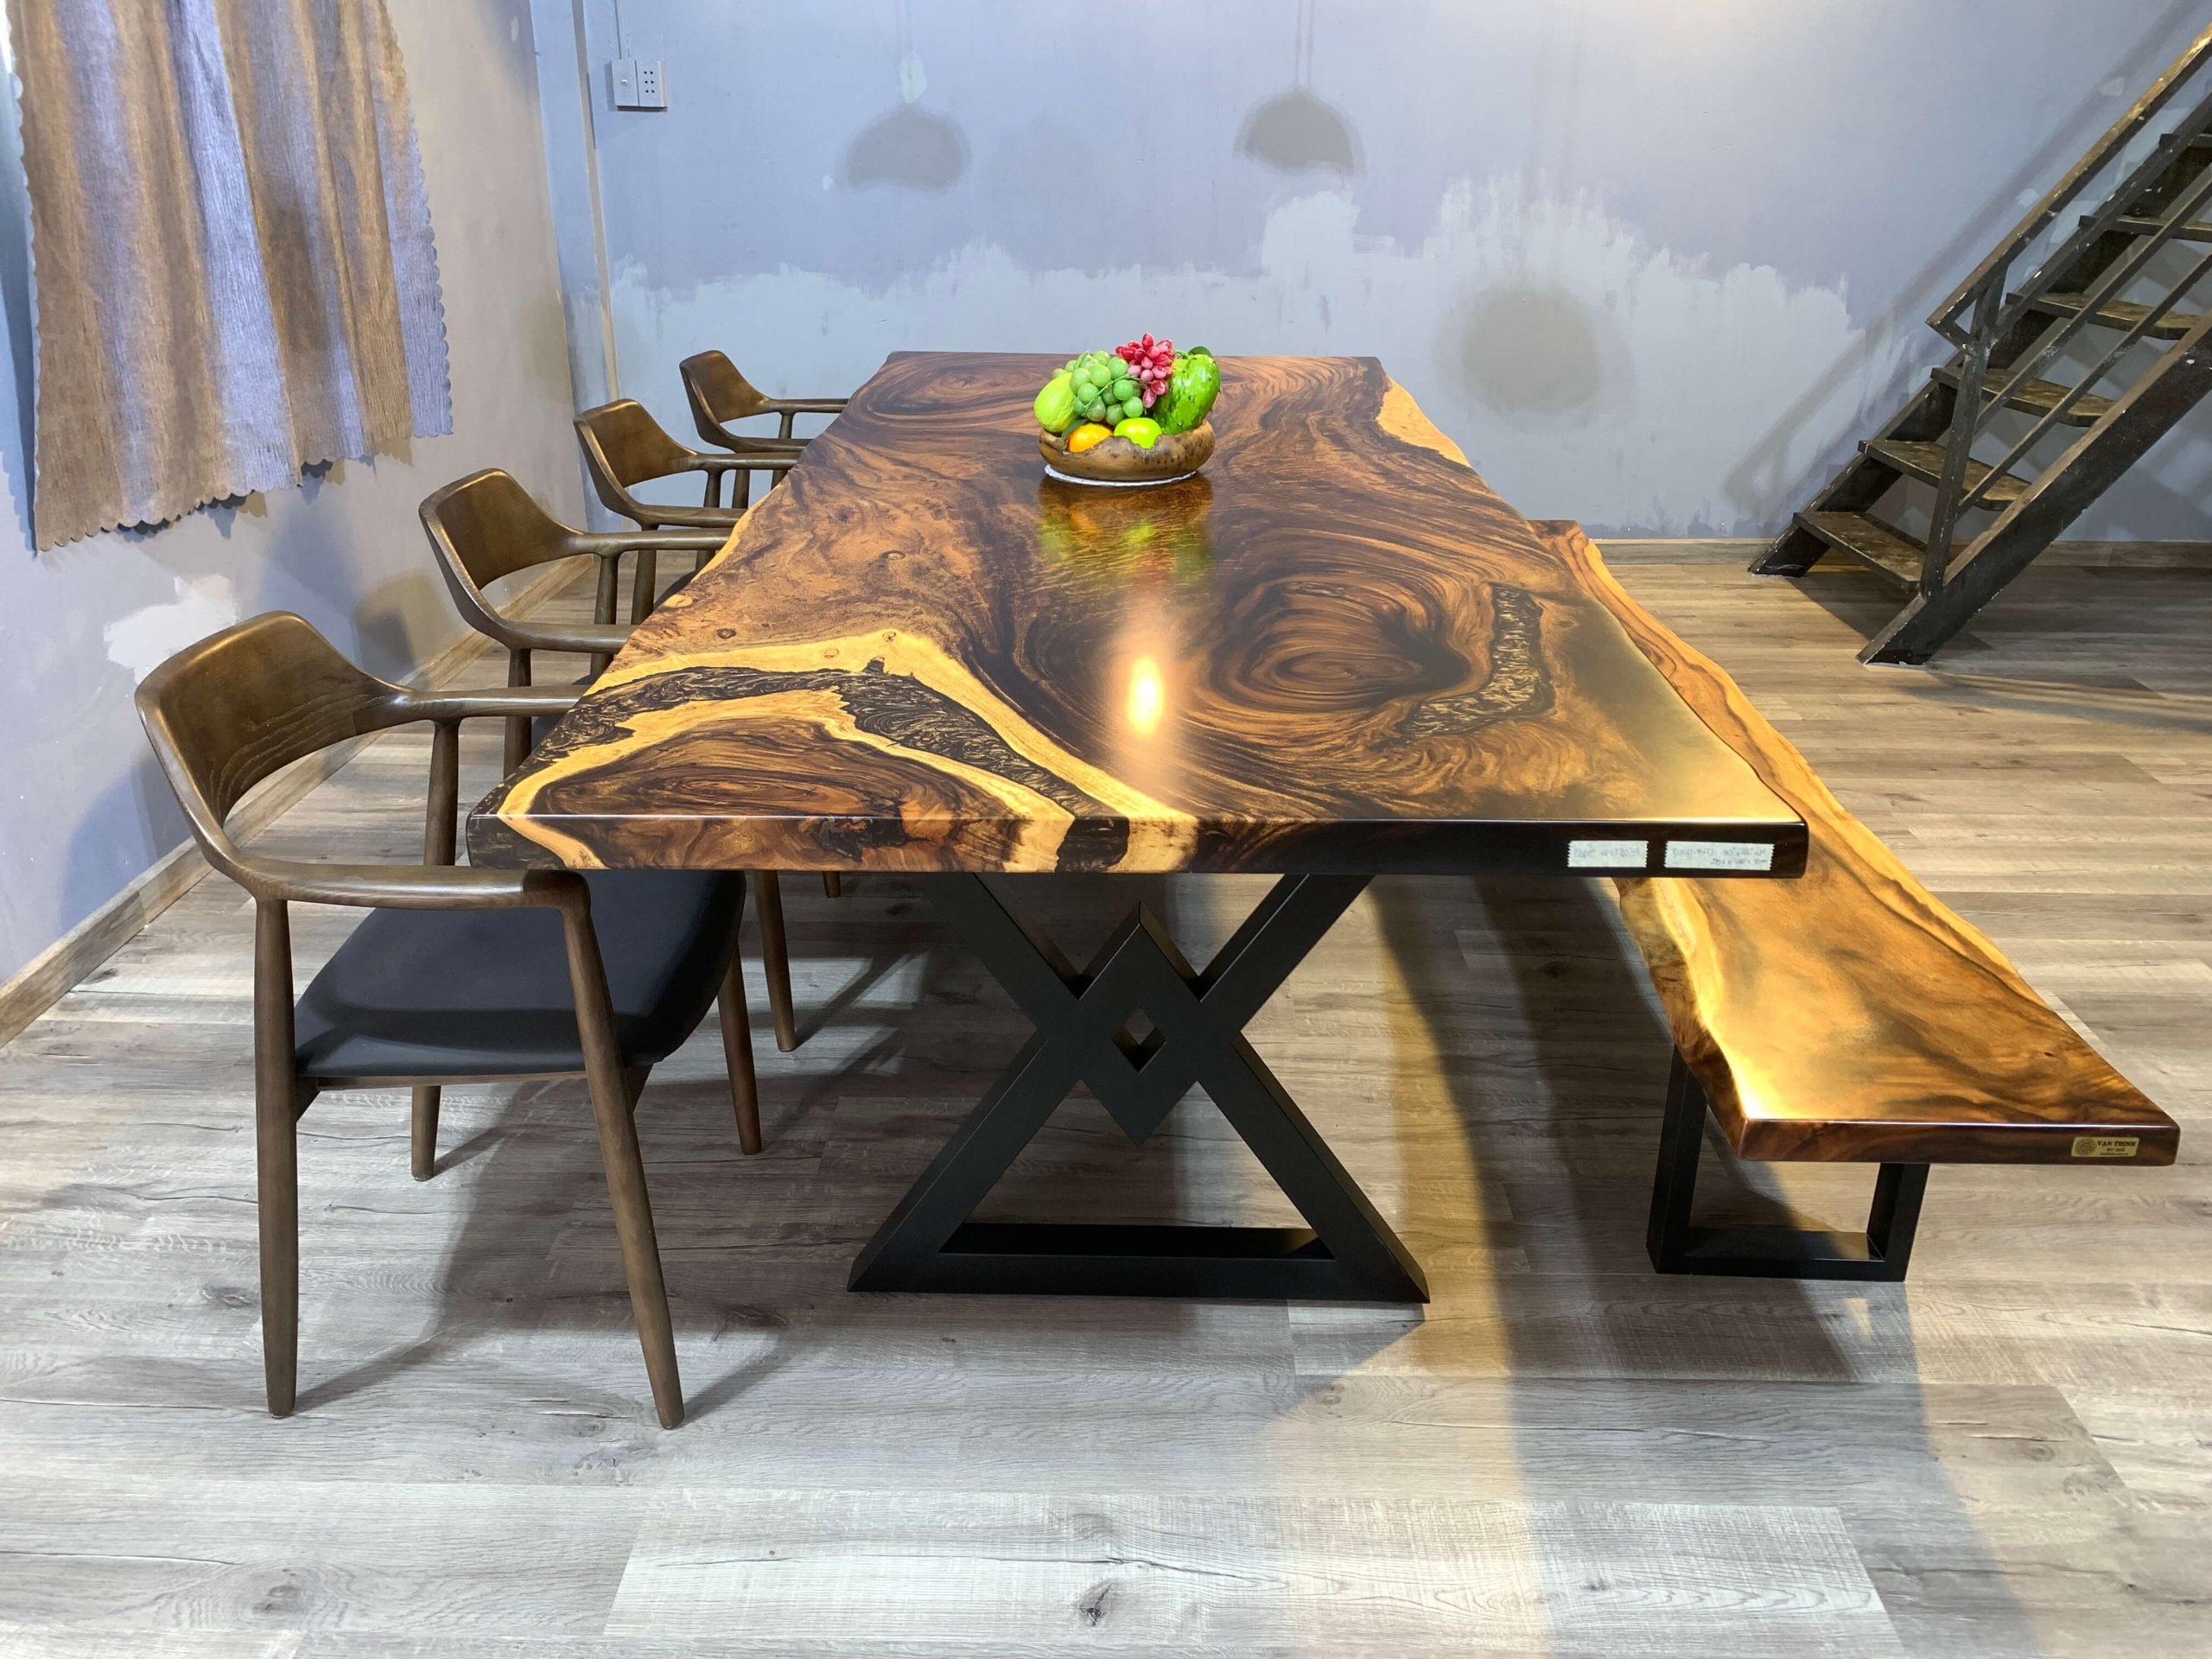 

                    
EUROPEAN FURNITURE Africa Dining Table WVT0039-110-T Dining Table Wood/Black  Purchase 
